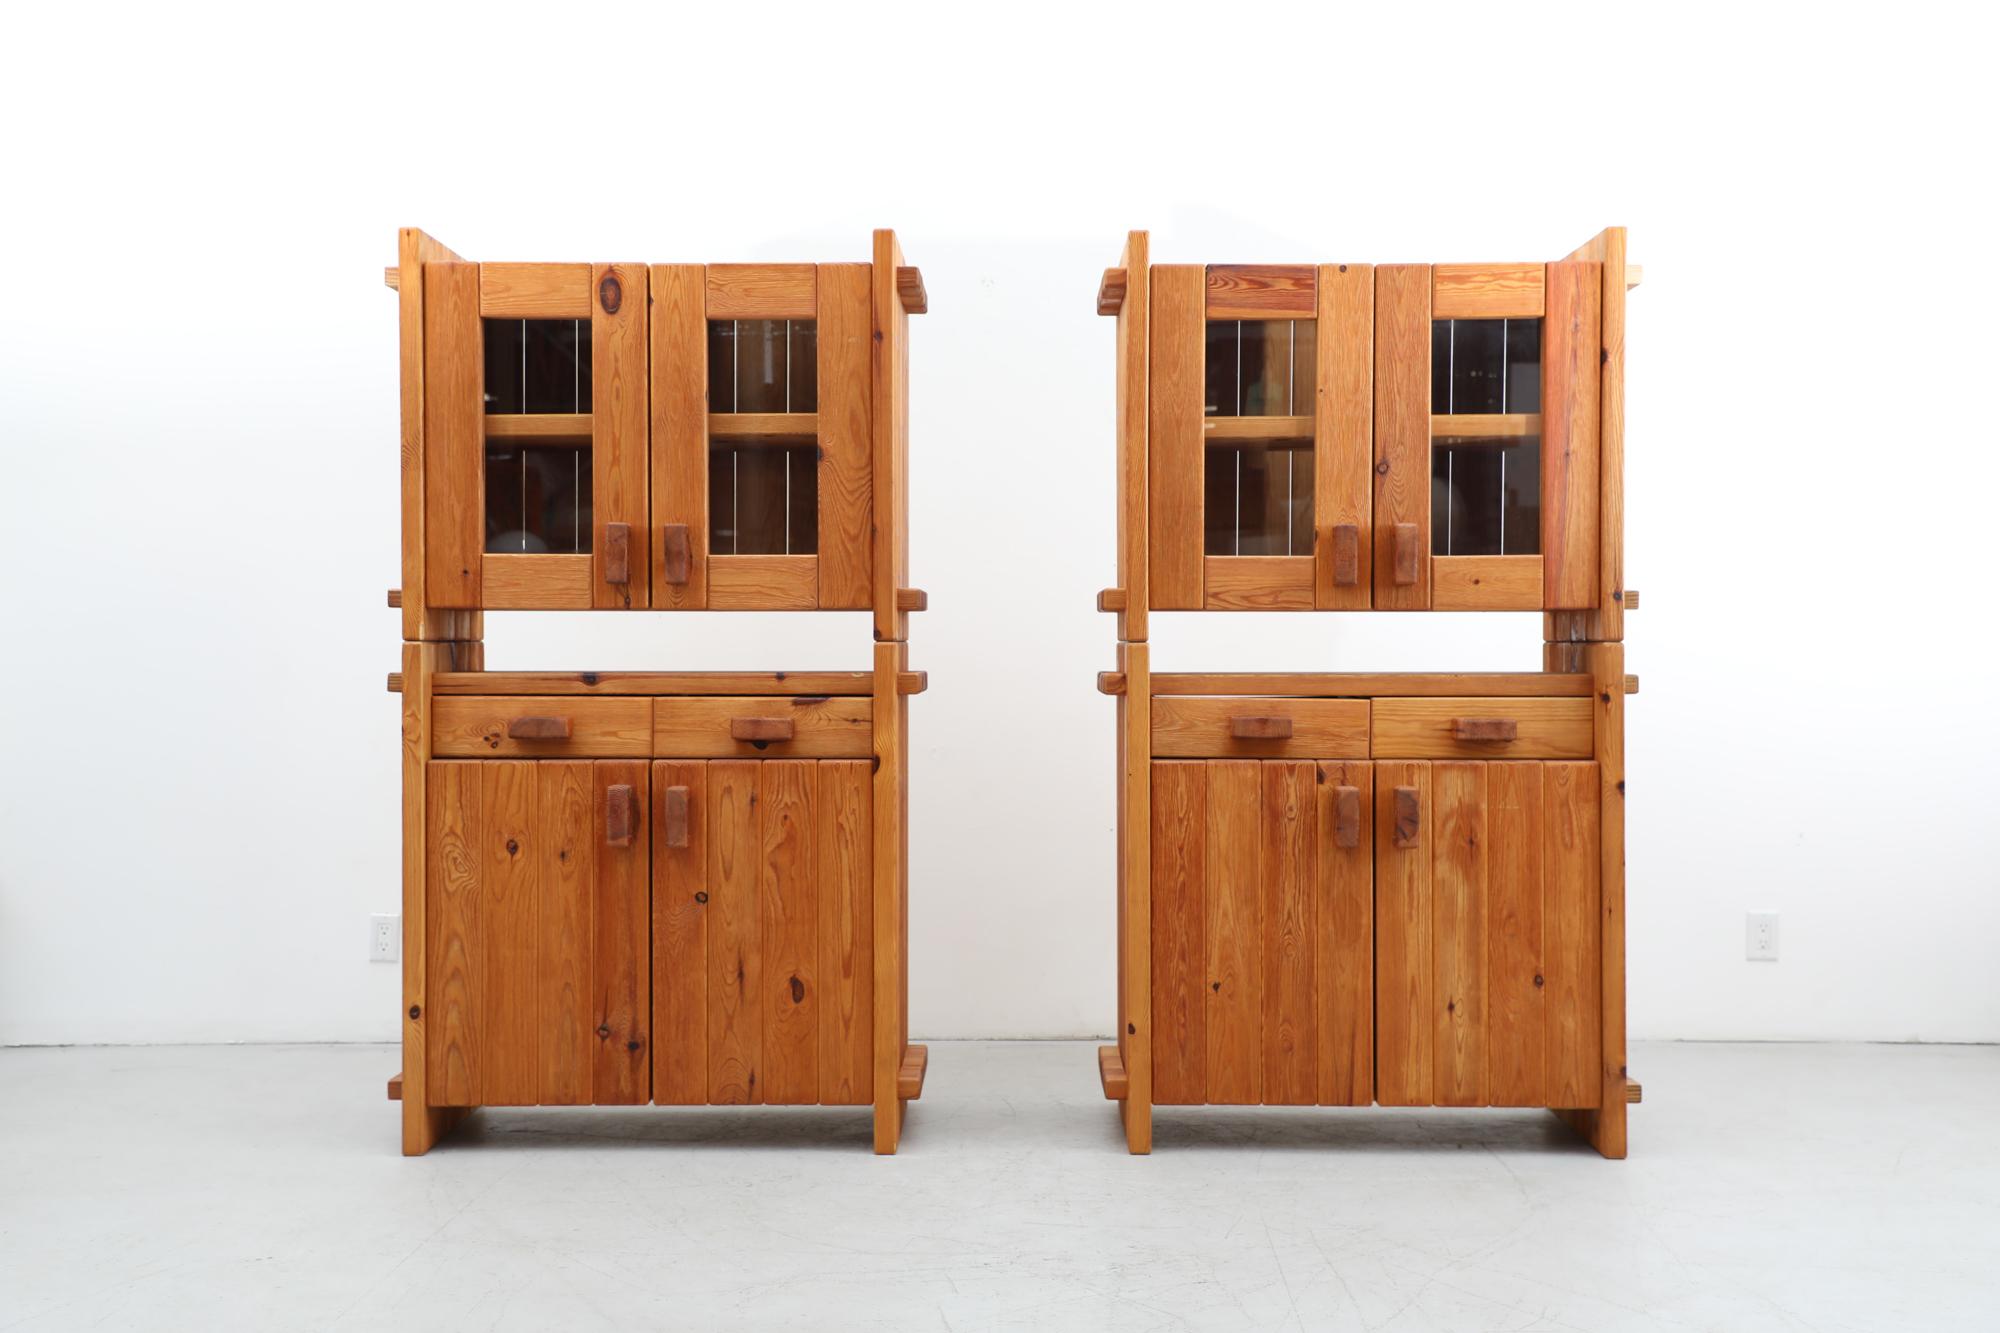 Gorgeous Danish Pomeranian Pinewood cabinets by Christian IV. Heavy pine storage cabinets with upper glass doors, chunky pine detail and pair of drawers over solid lower cabinets. The shelves are adjustable and the doors close with a magnetic latch.